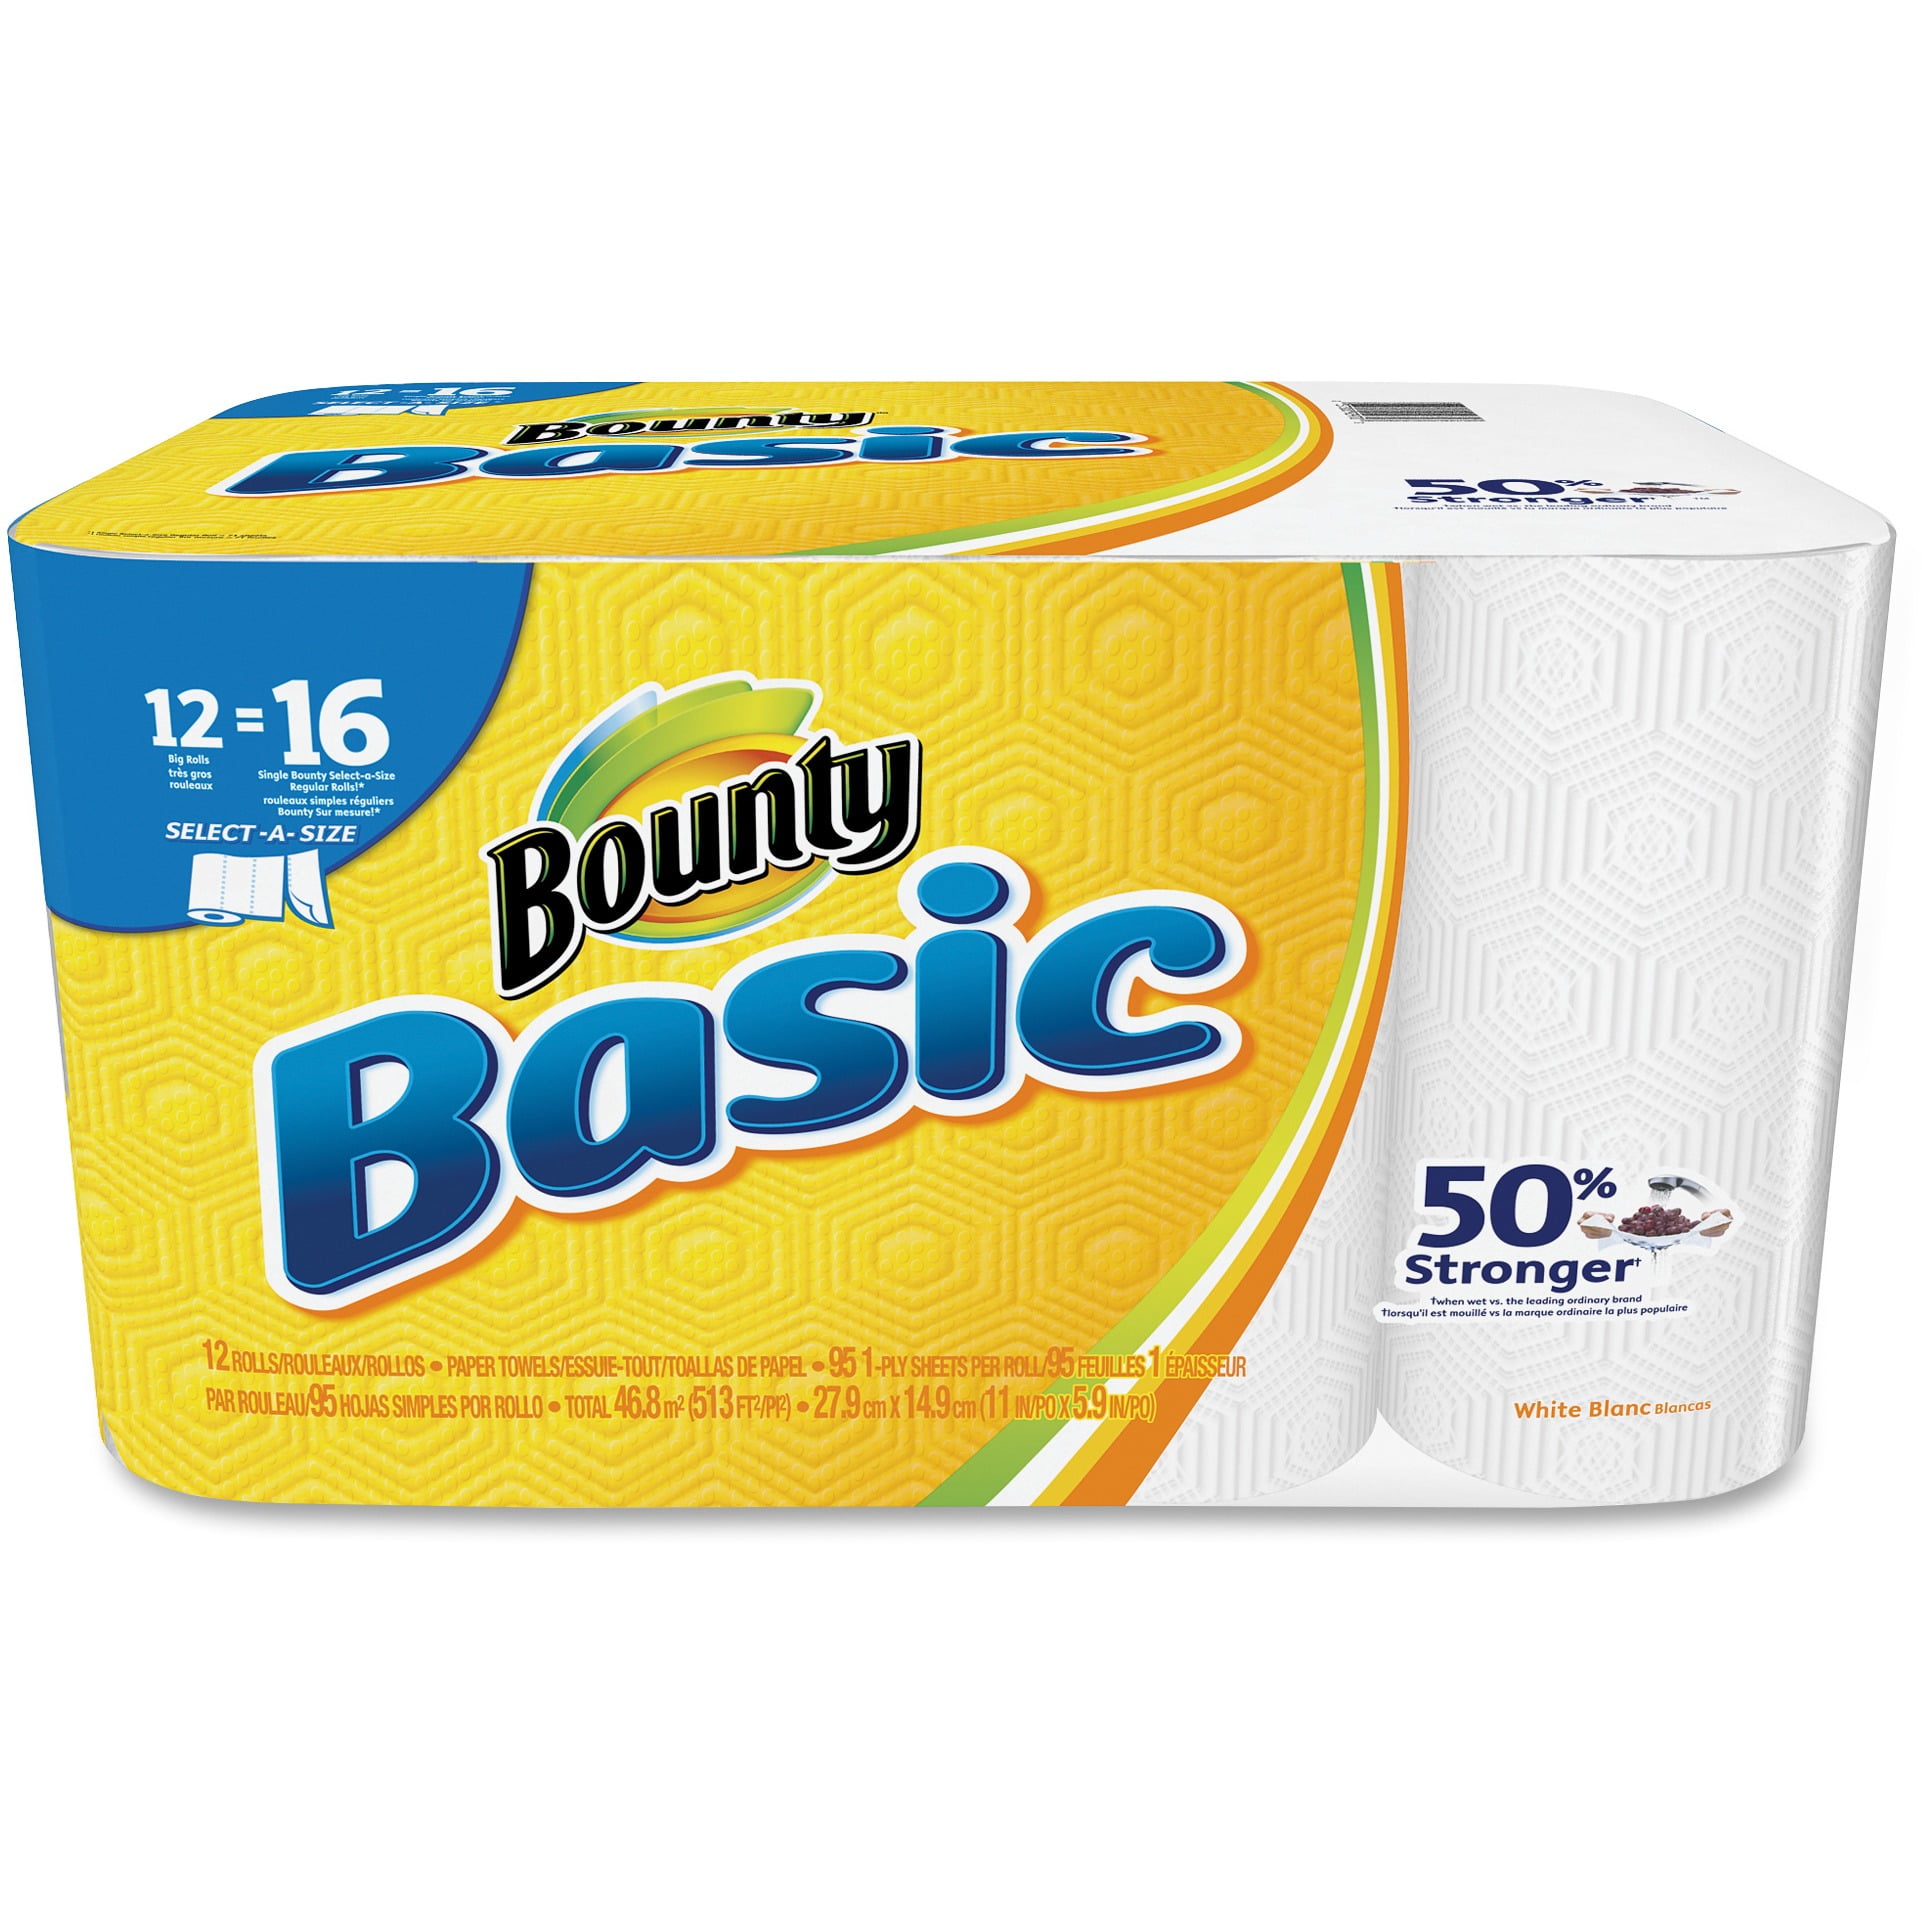 Quick-Size Paper Towels 16 Family Rolls = 40 Regular Rolls 1 Pack